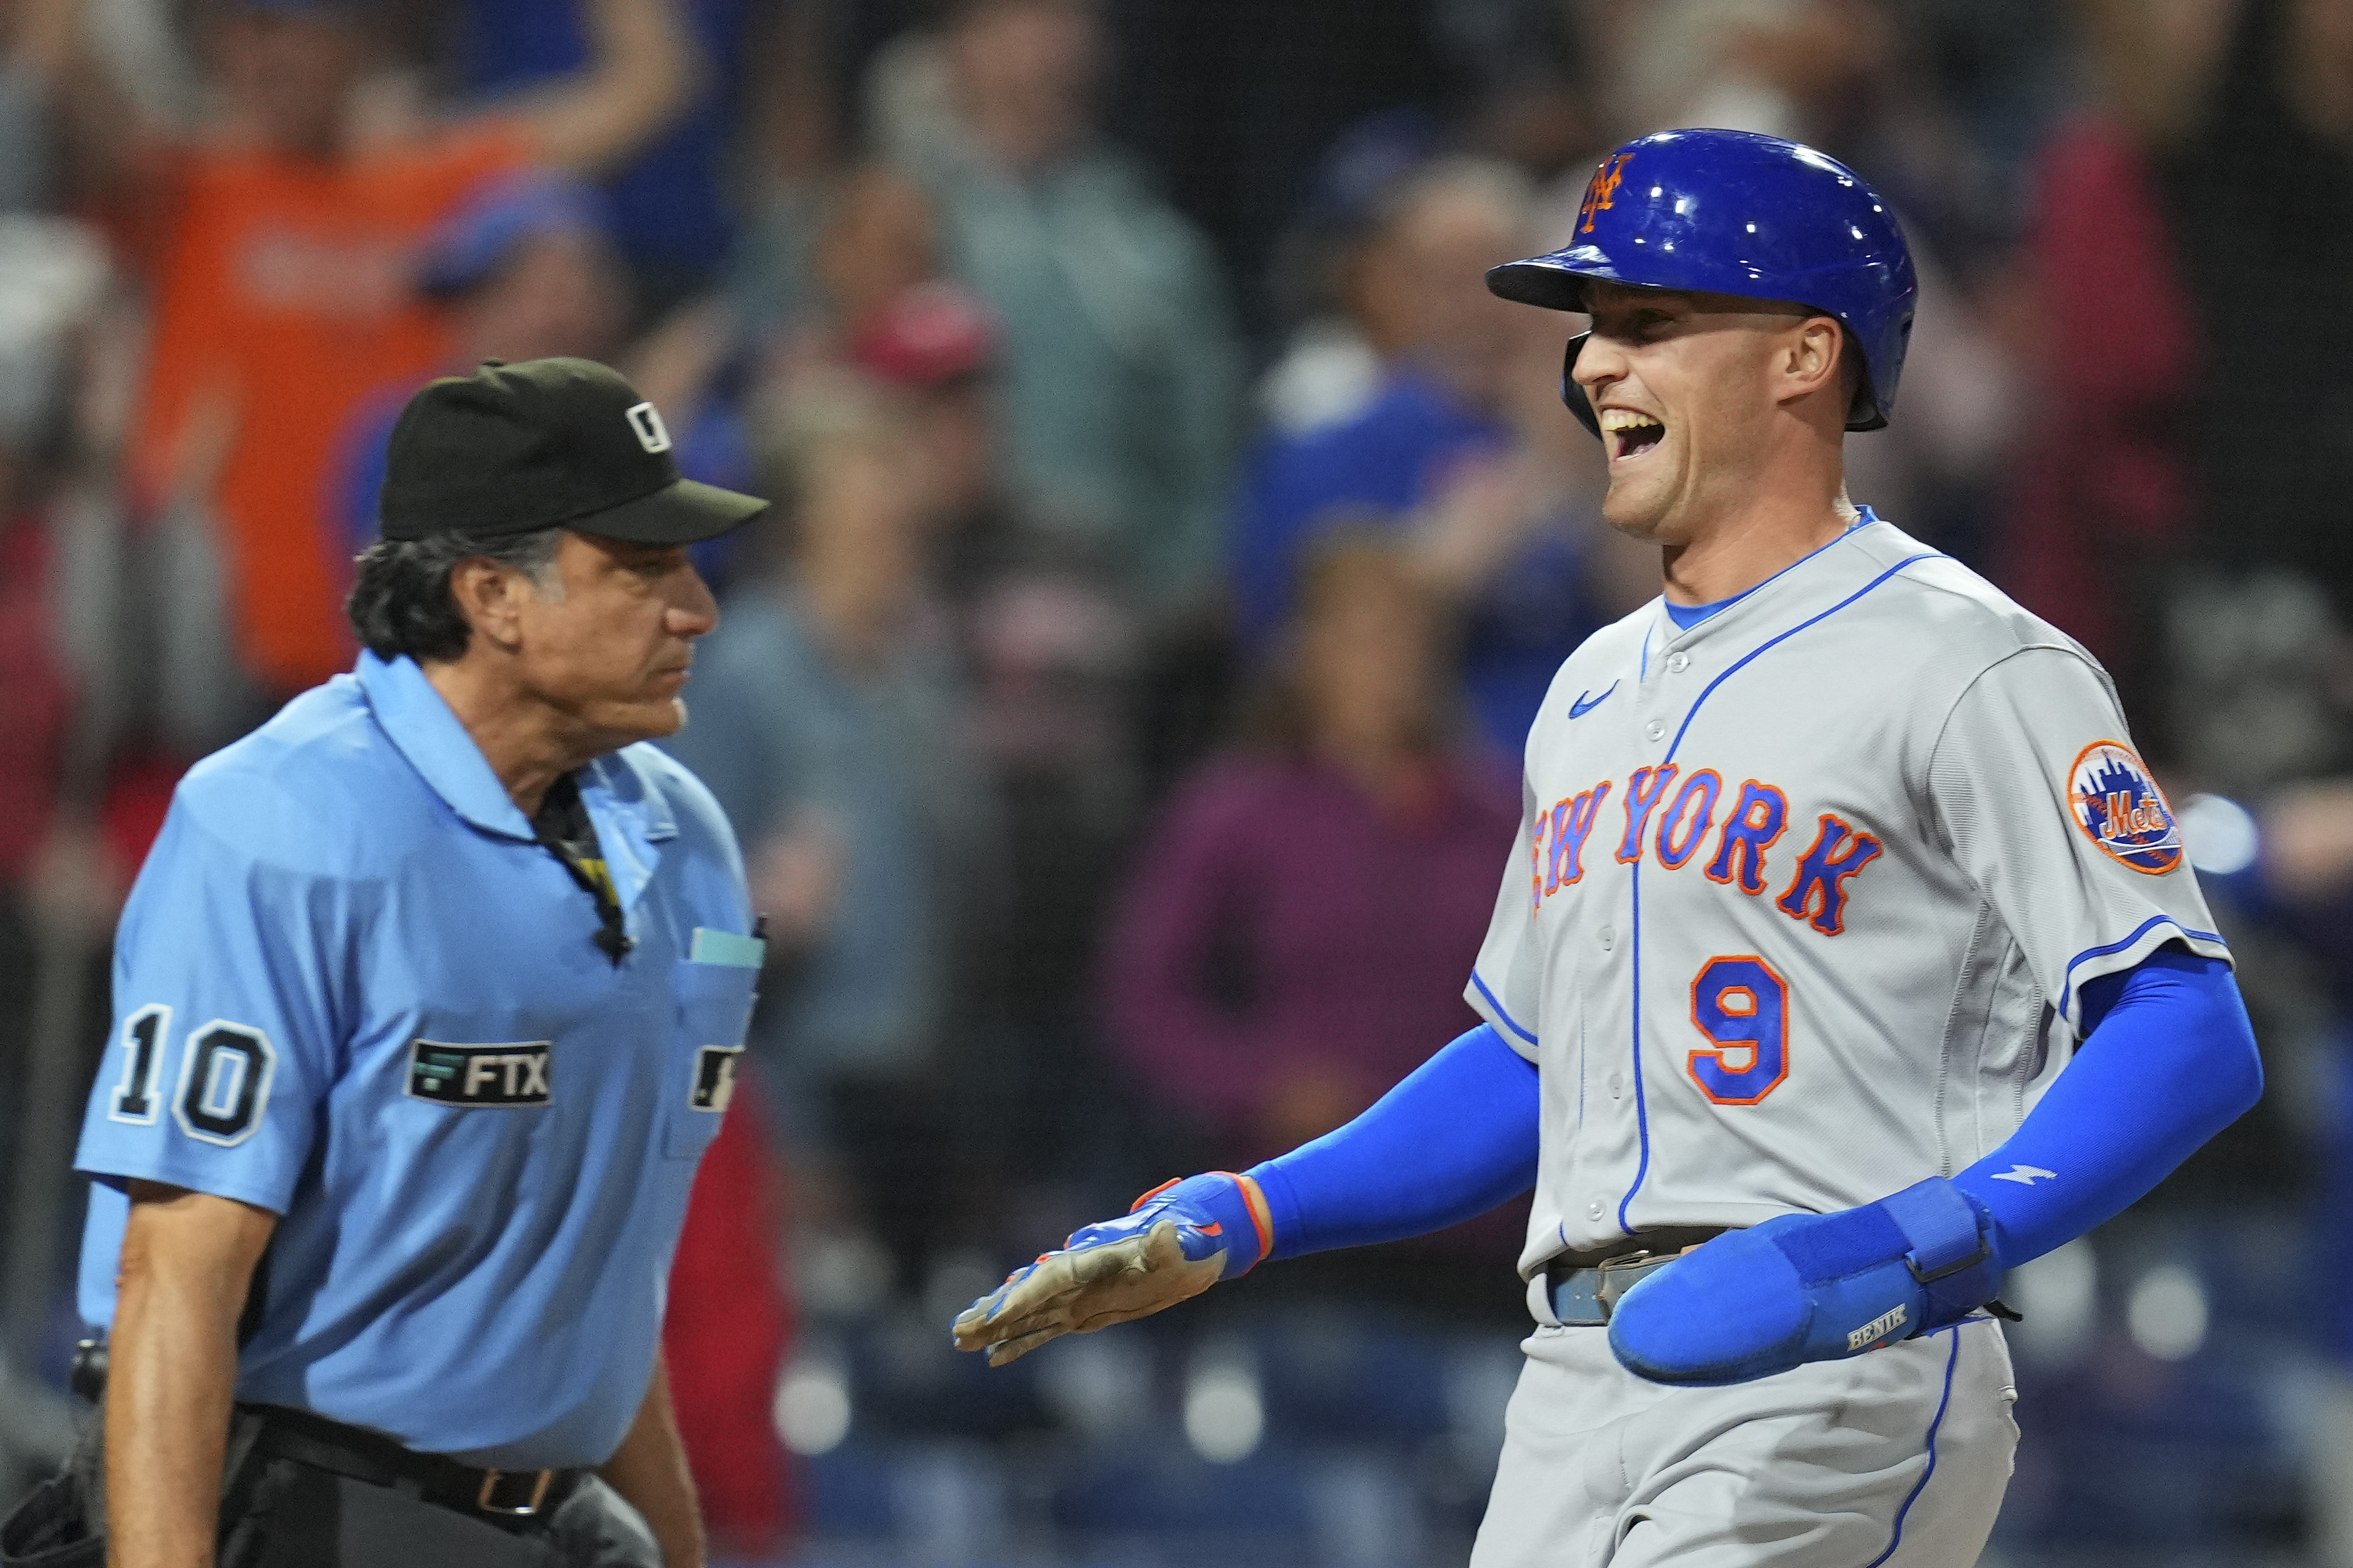 Mets defeat Phillies as Colon gets sixth win